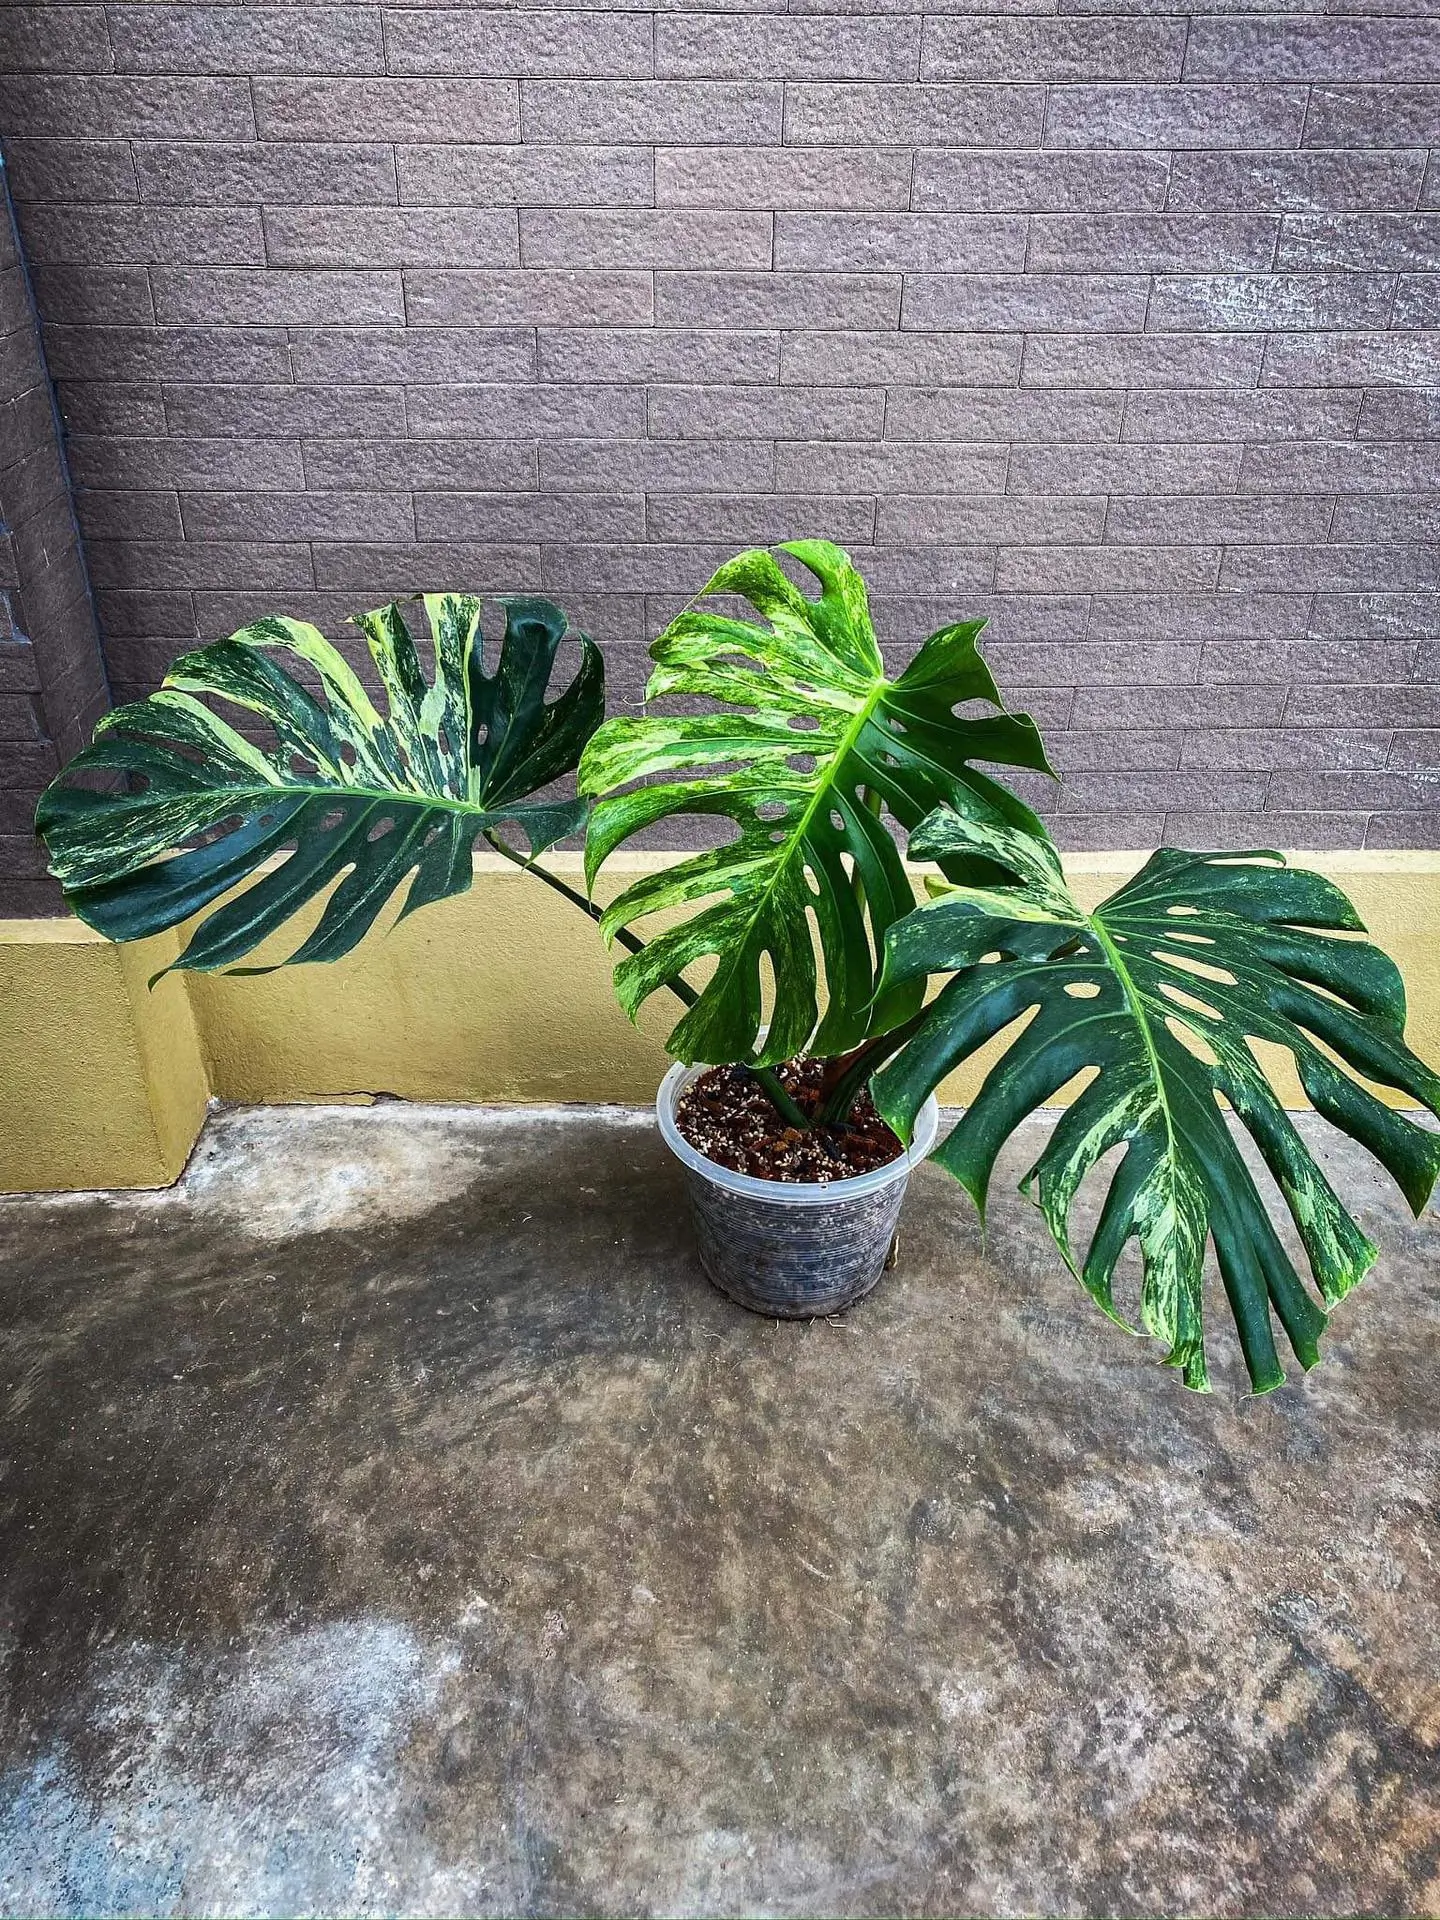 Monstera-Deliciosa-Ocean-Mint-Variegated from thailand